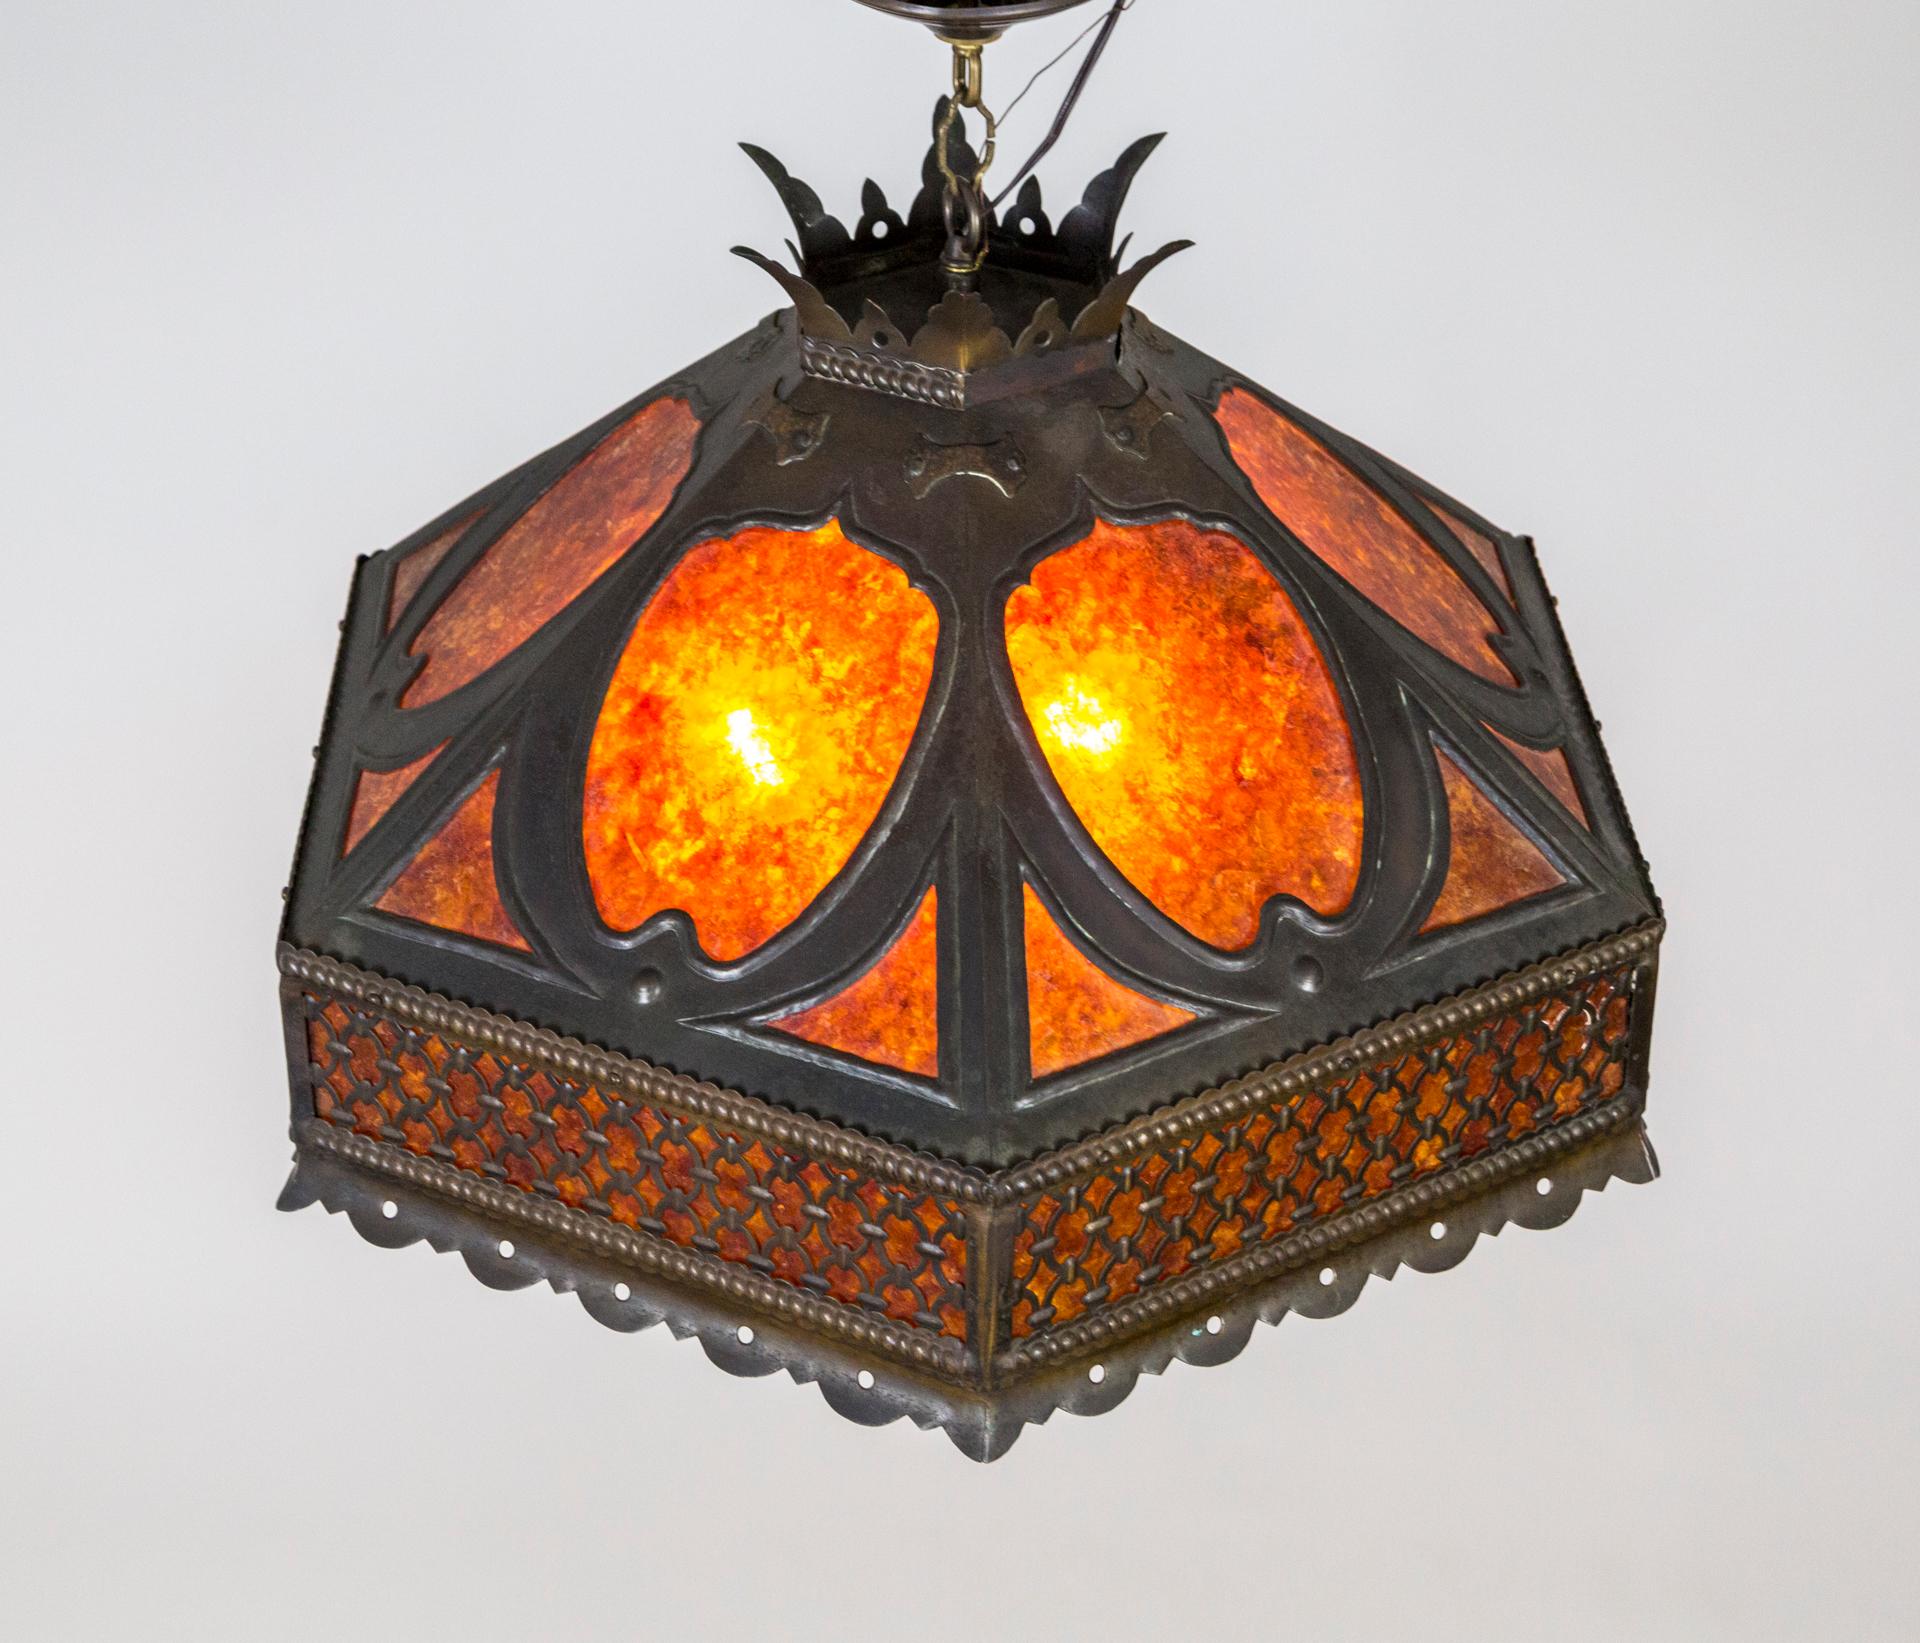 A mica pendant light in an angular, faceted, umbrella shape with a noteworthy, crowned top. Framed and decorated with darkened, cut brass. It emits a warm, orange glow when lit. Hanging with a short chain and canopy. Newly wired with medium base, 3